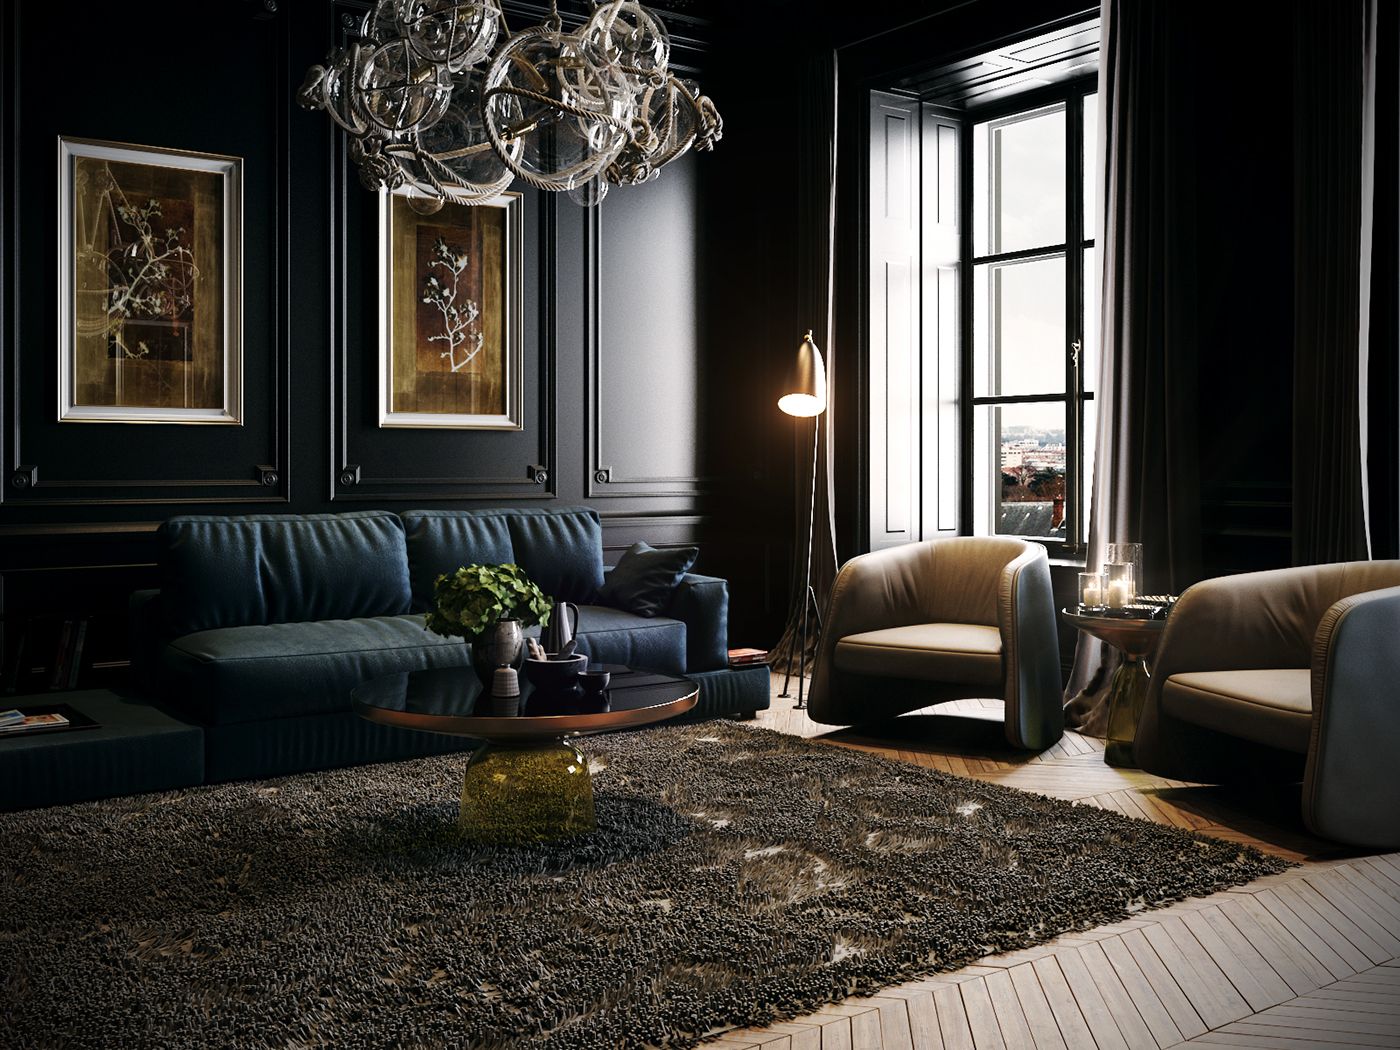 Elegant Interiors: A Refined Touch Of Luxury